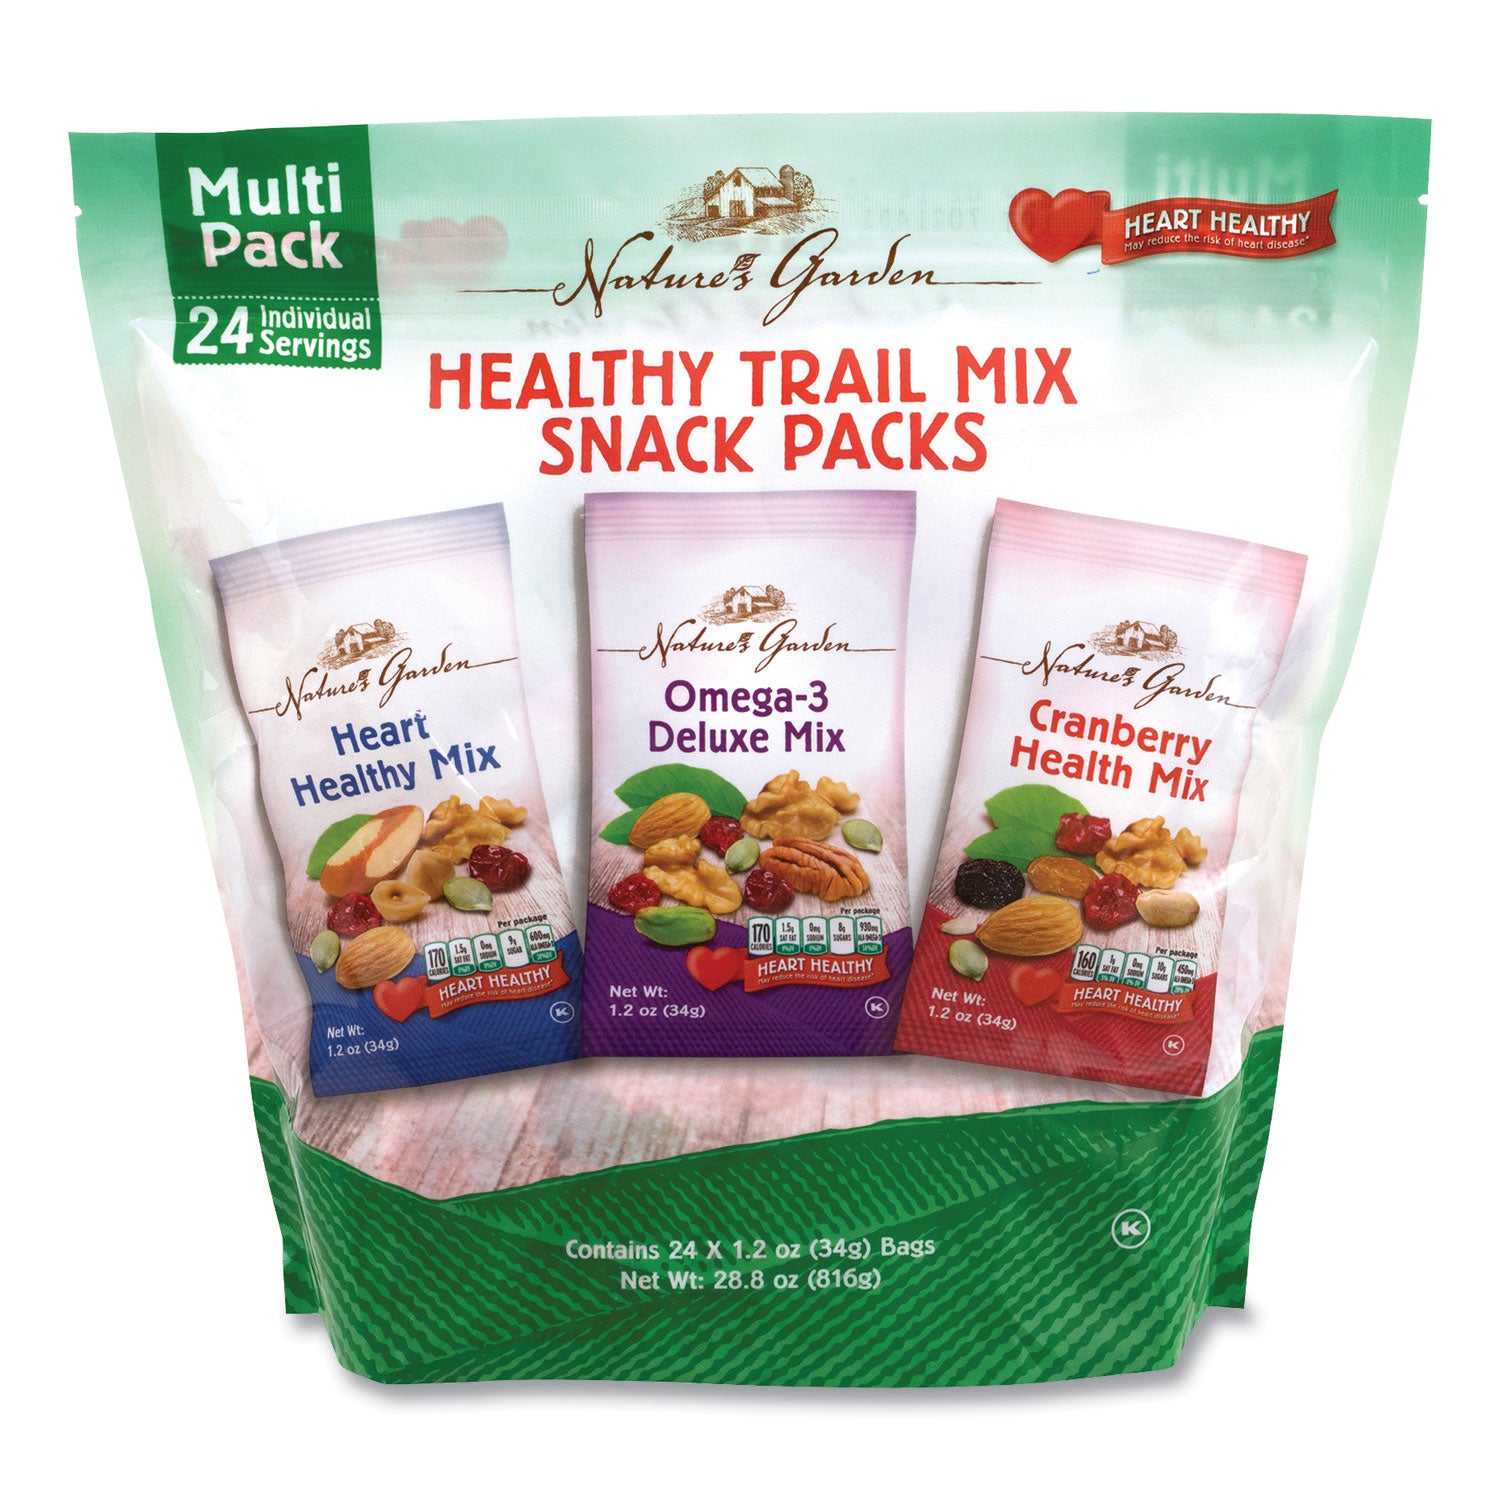 healthy-trail-mix-snack-packs-12-oz-pouch-24-pouches-carton-ships-in-1-3-business-days_grr29400003 - 1